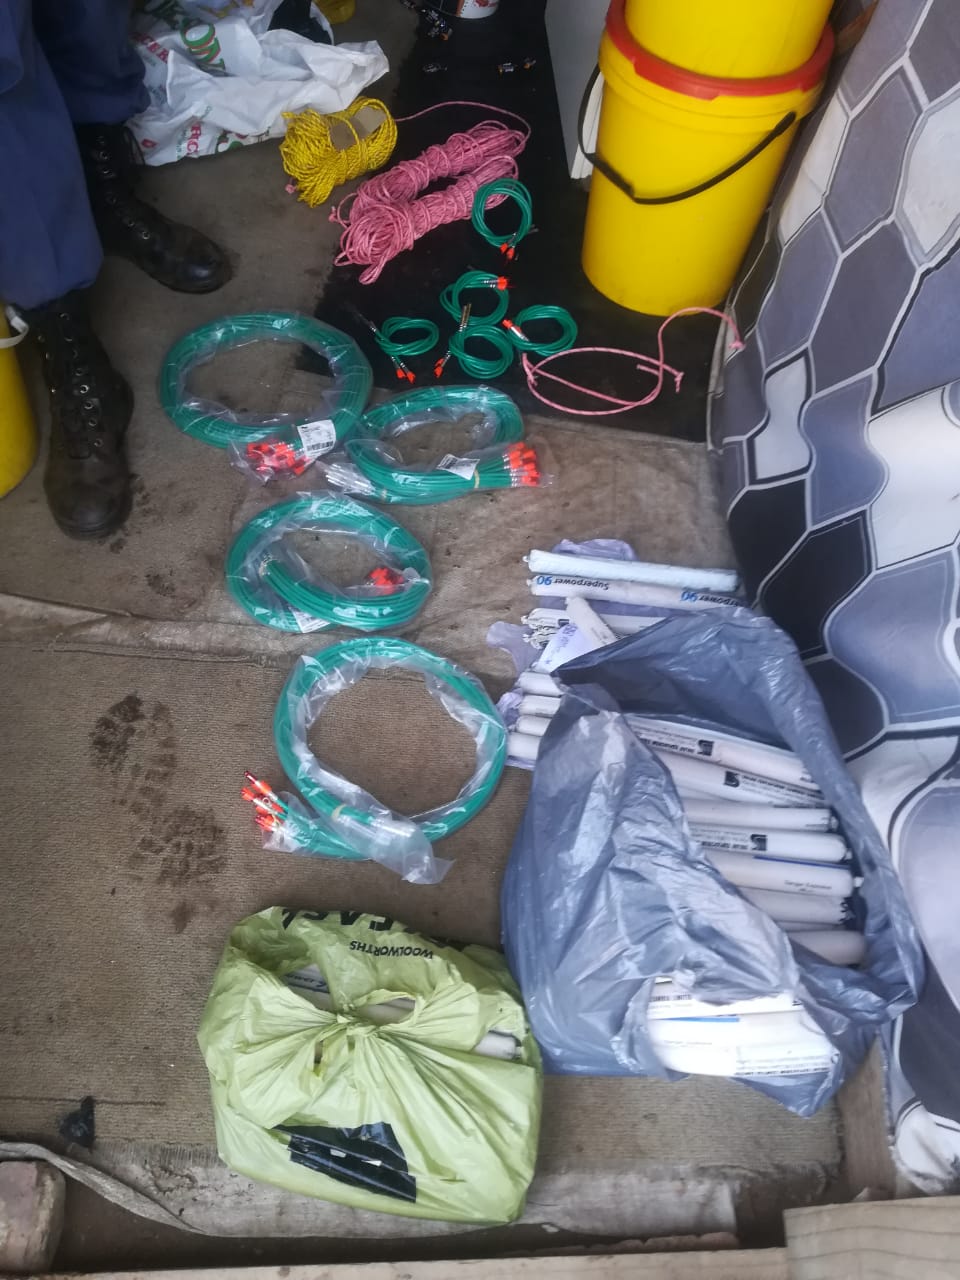 Police arrest two suspects and seize explosives possibly meant for illegal mining in Langlaagte, Johannesburg